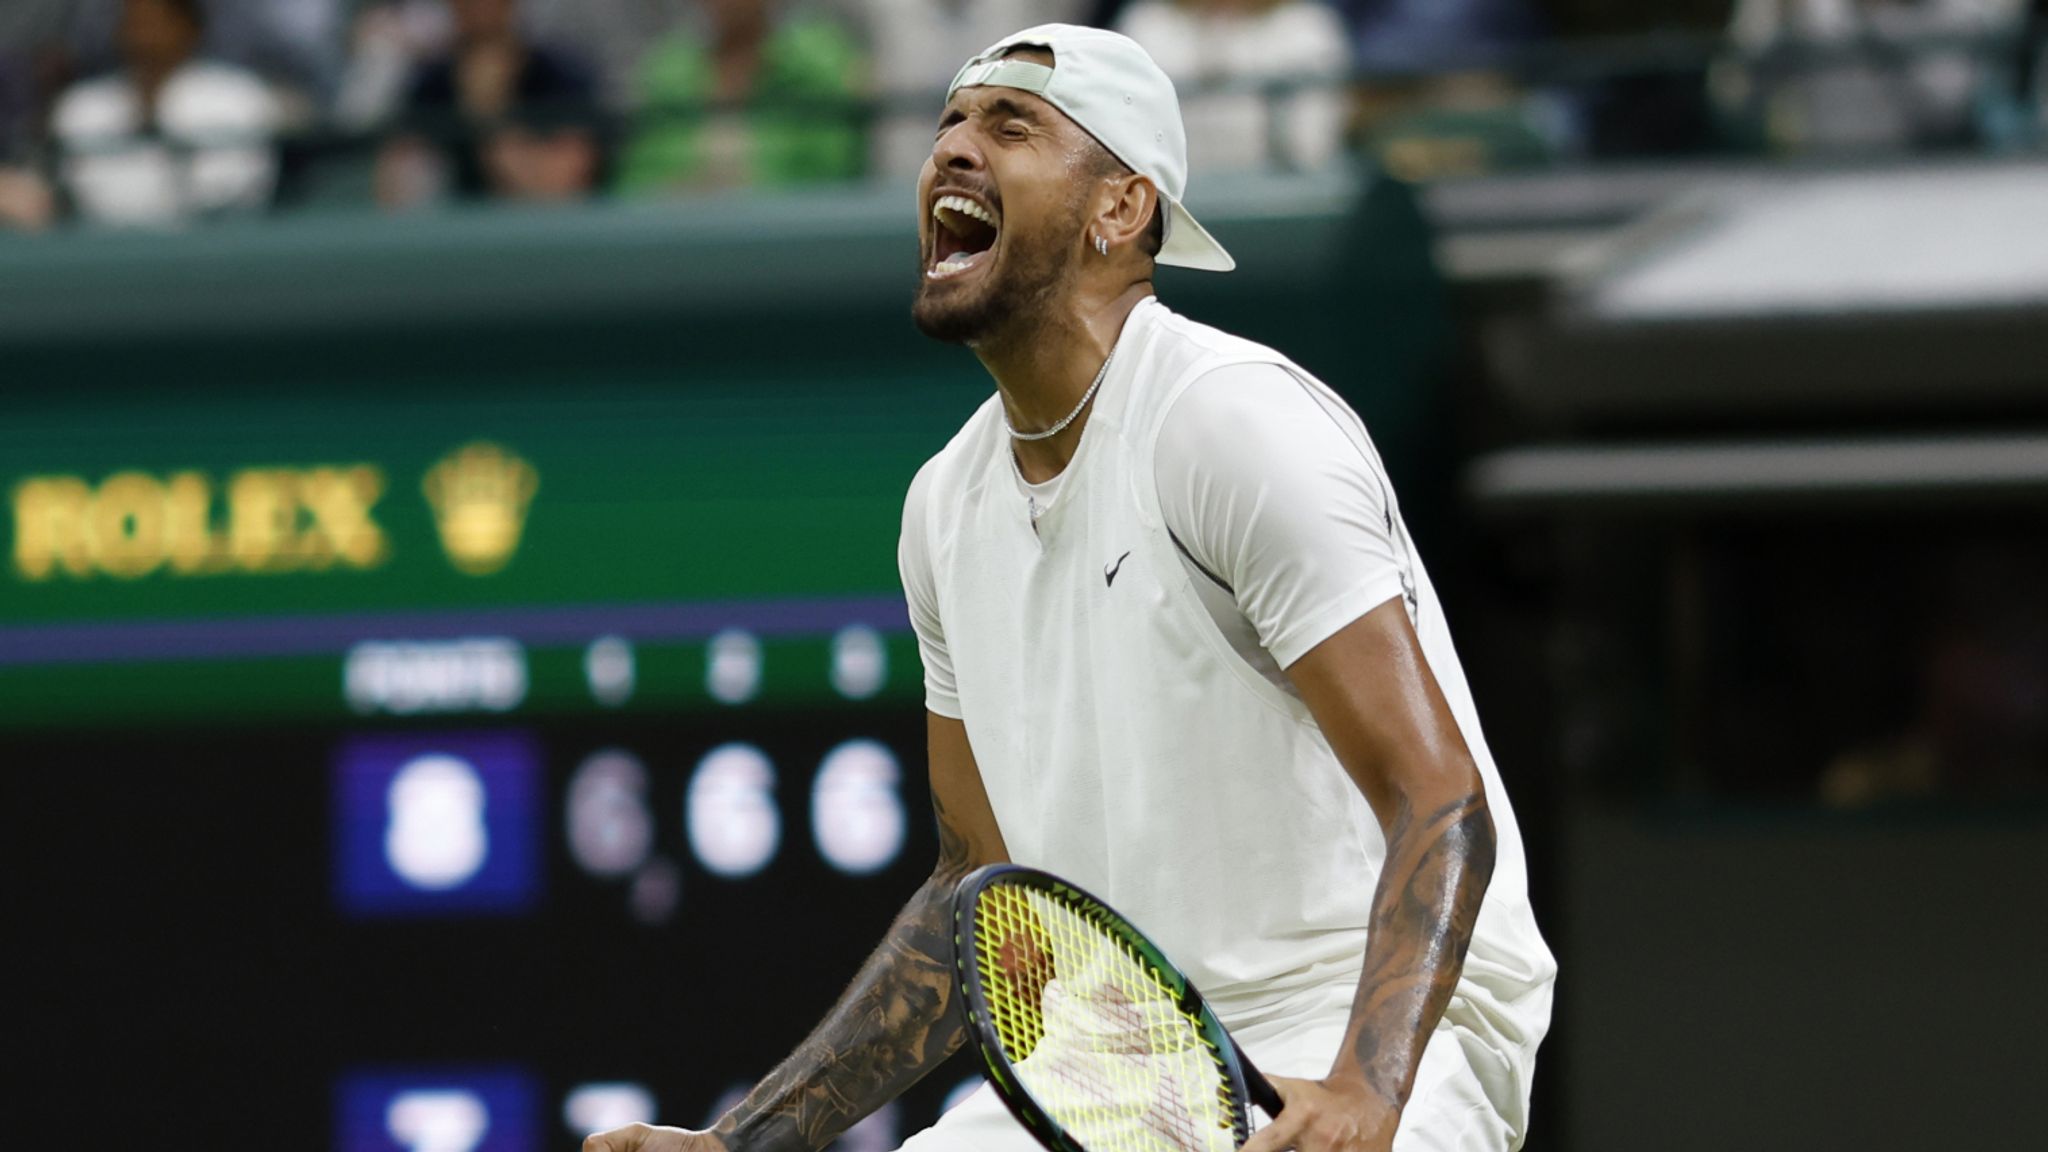 Wimbledon Nick Kyrgios joins Rafael Nadal in the second week of the Grand Slam after fiery clash Tennis News Sky Sports